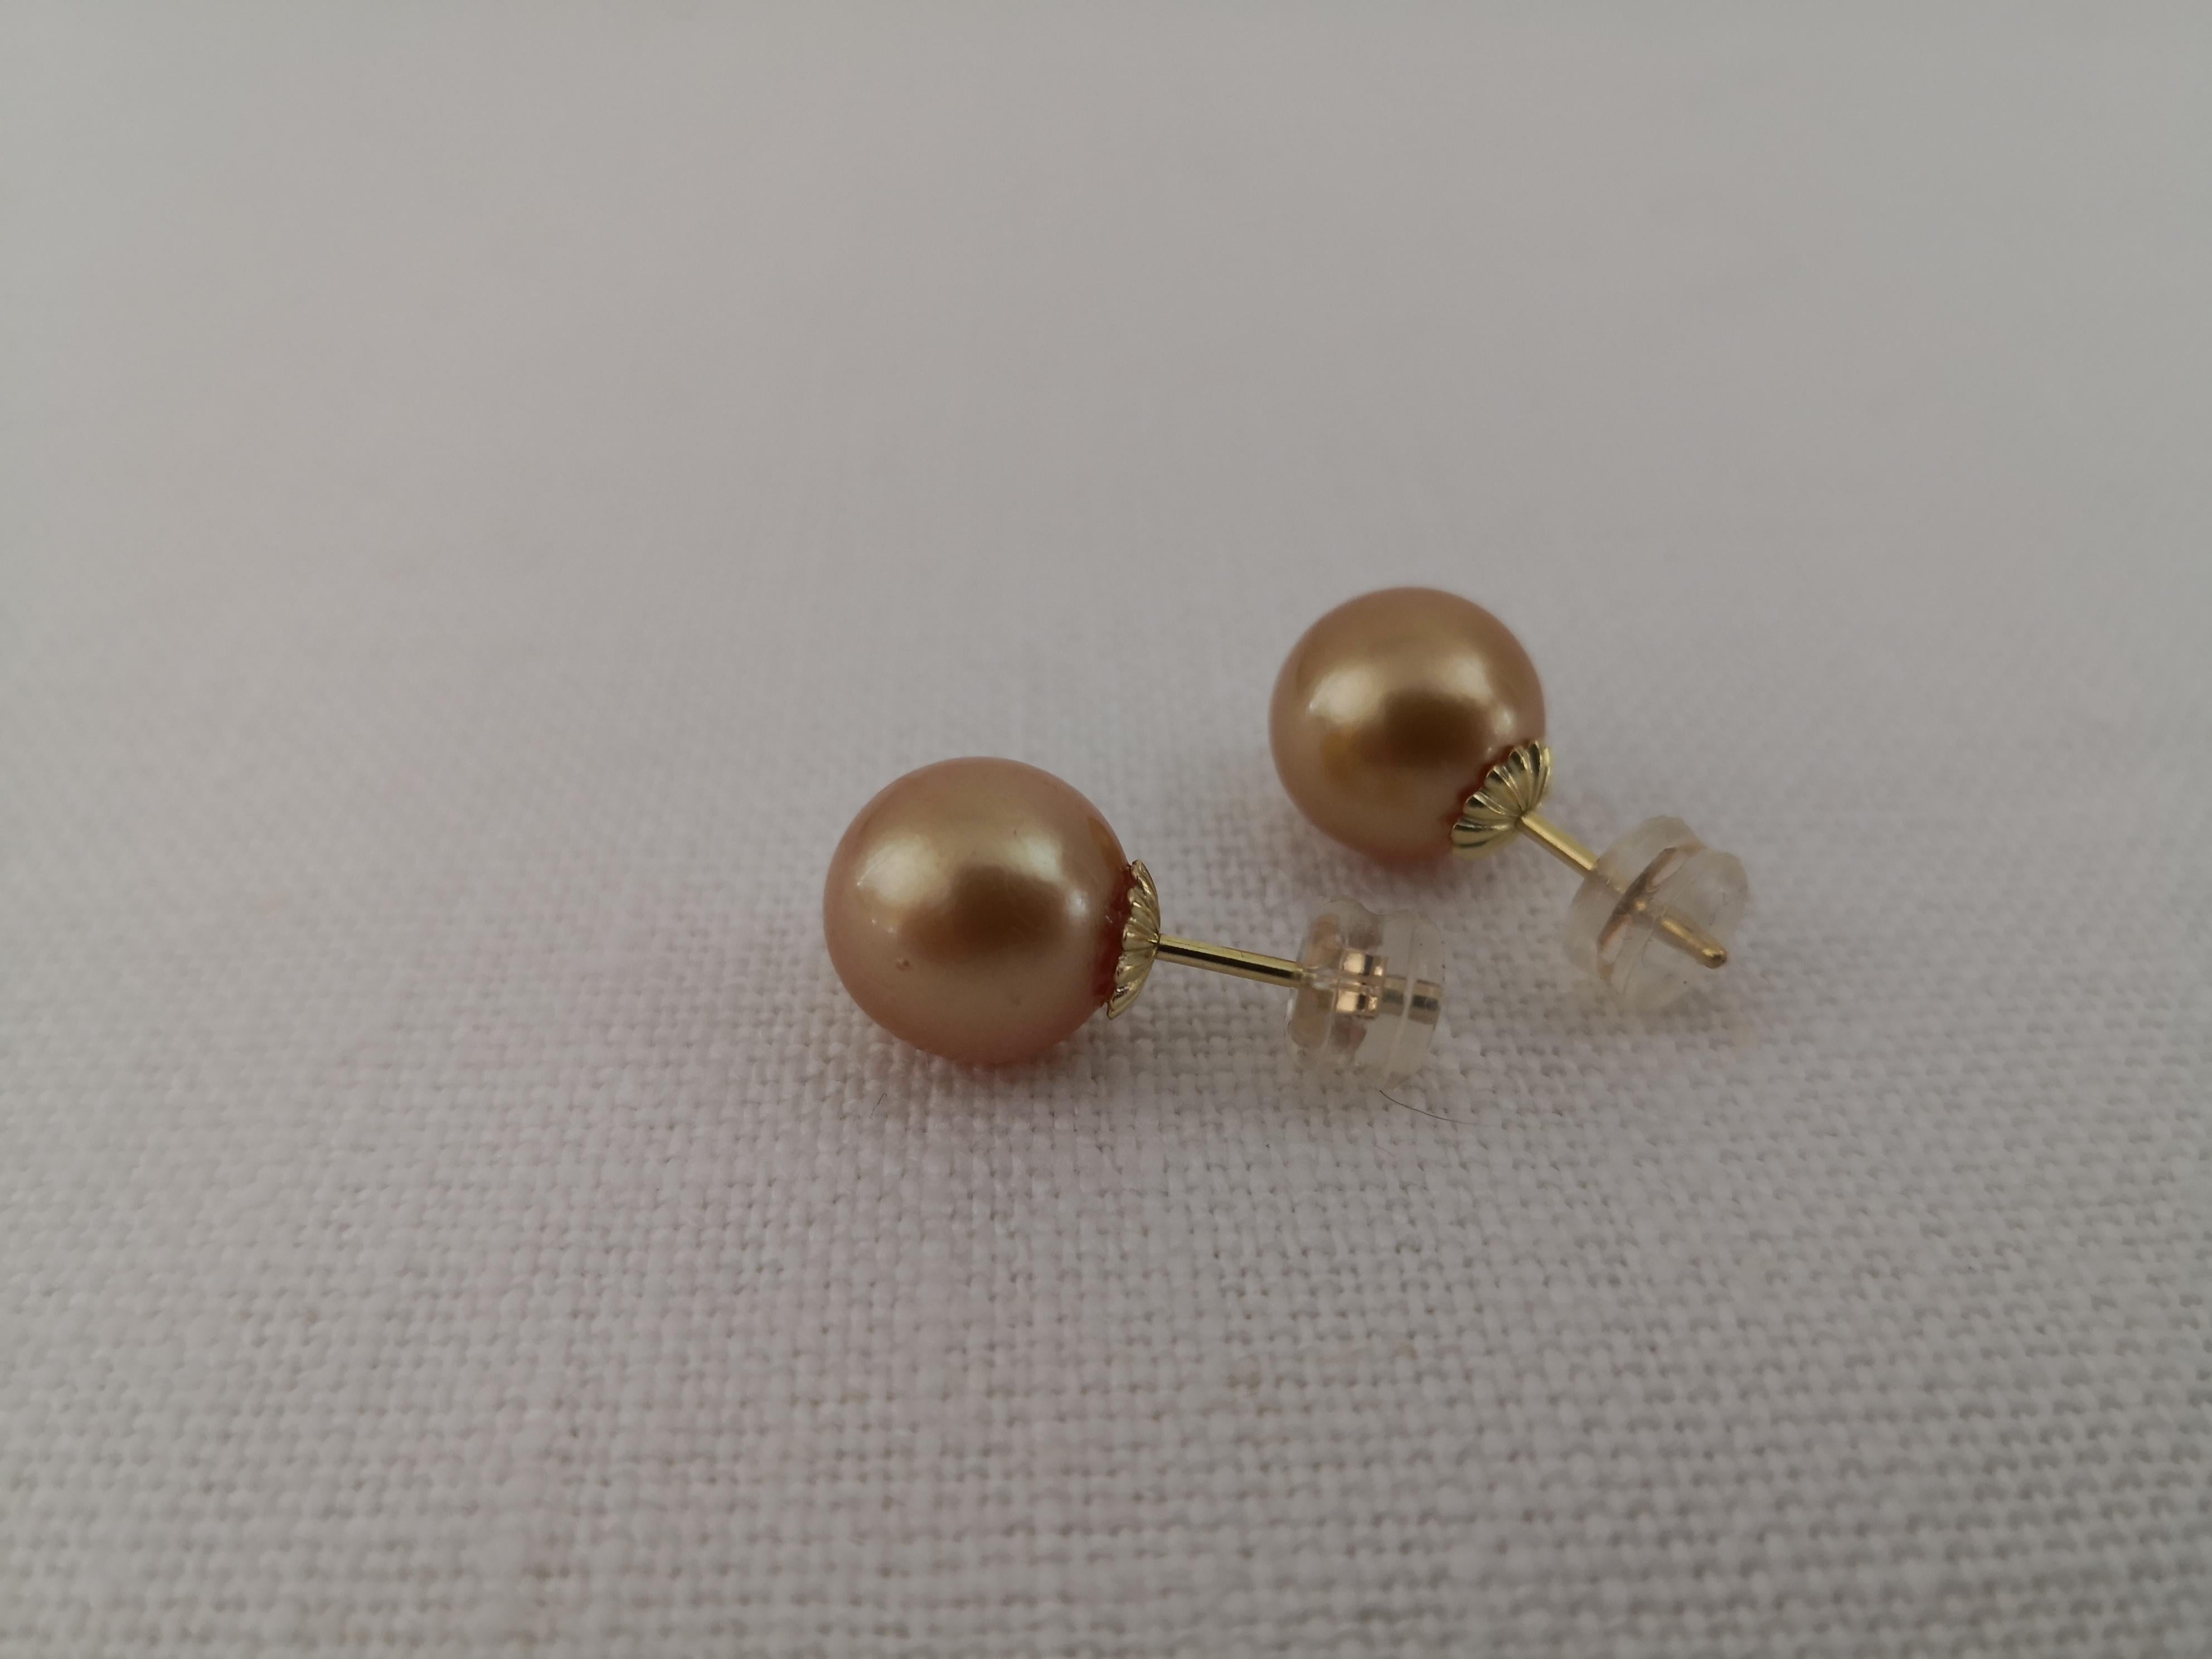 Contemporary Golden South Sea Pearls Earrings, Round, 18 Karat Gold